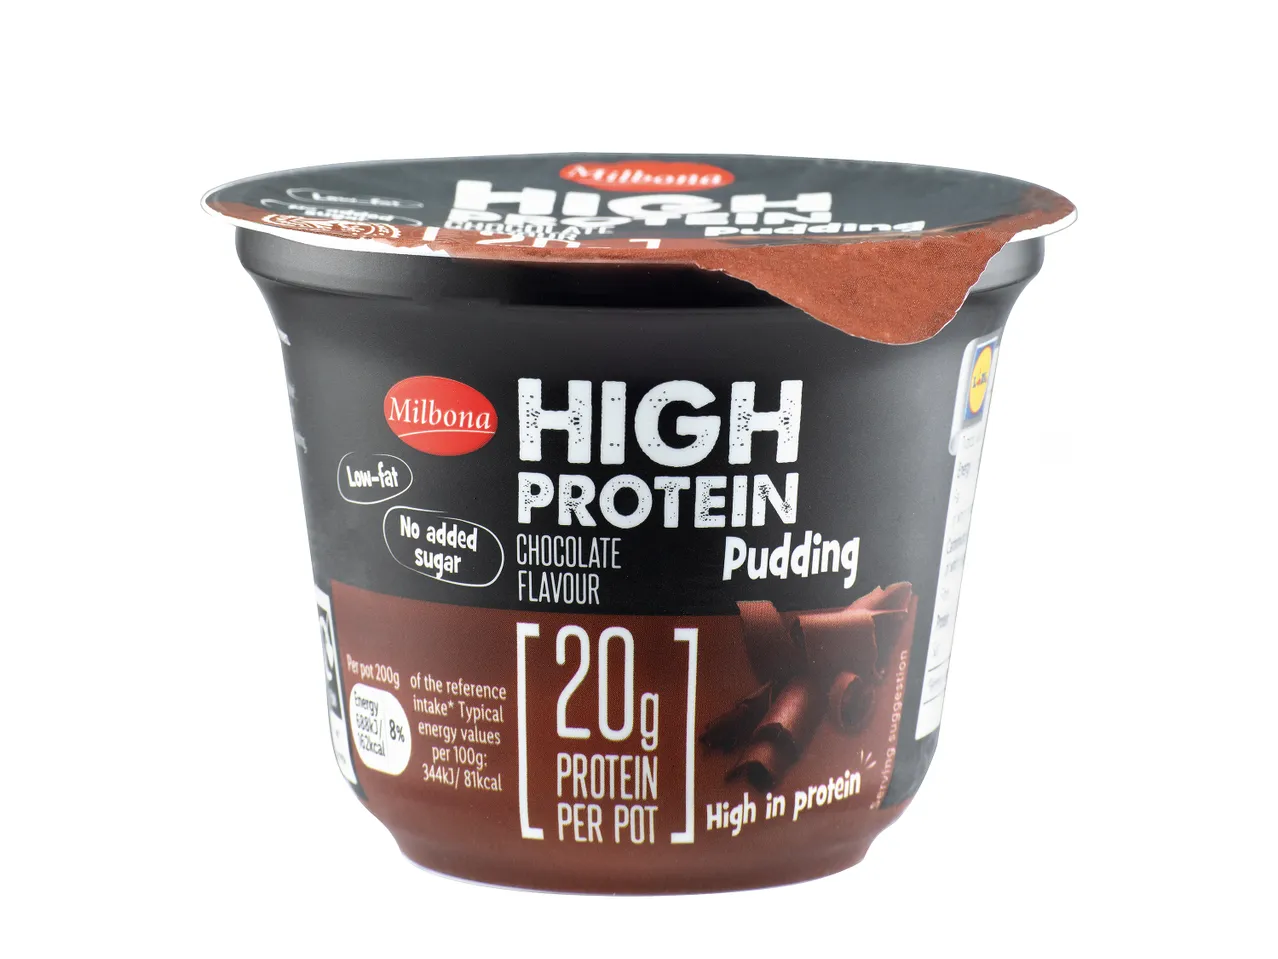 Go to full screen view: Milbona High Protein Pudding Chocolate - Image 1